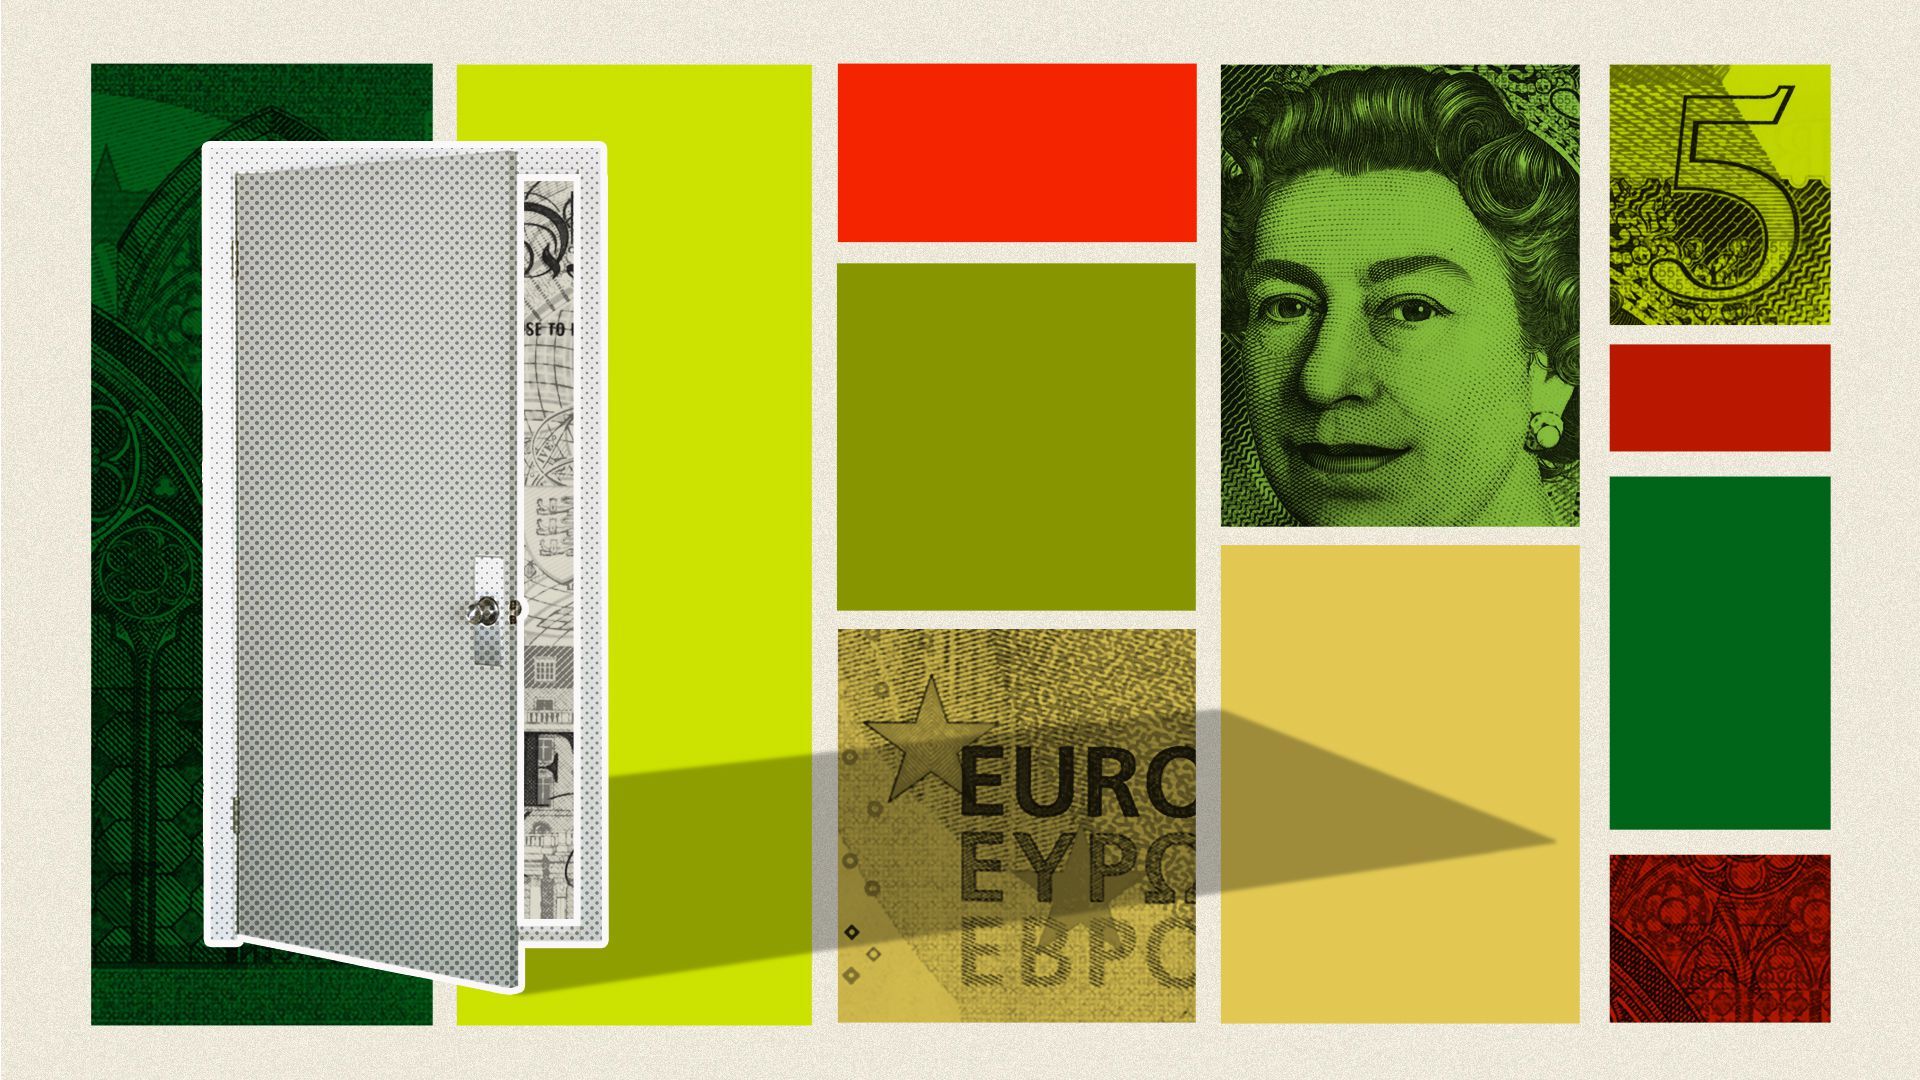 Illustrated collage of UK and European currency and an open door.